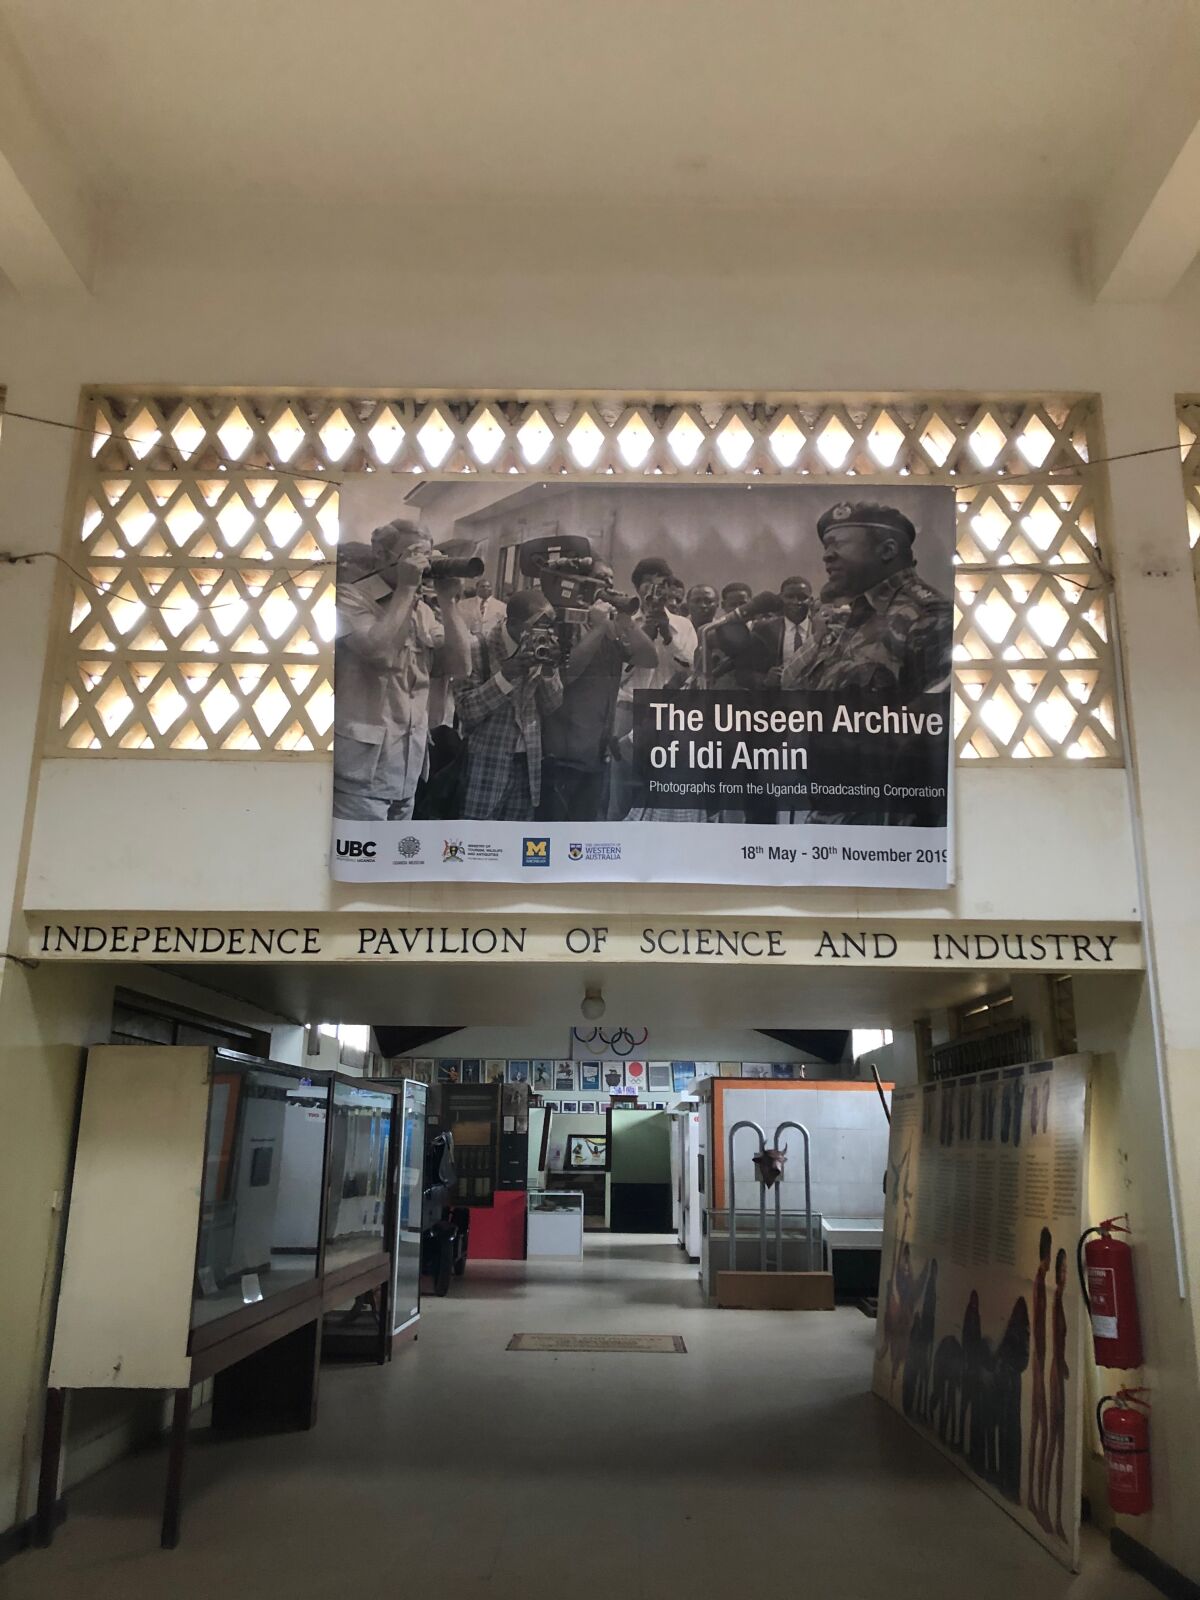 "The Unseen Archive of Idi Amin" is being exhibited at the Uganda Museum in Kampala.